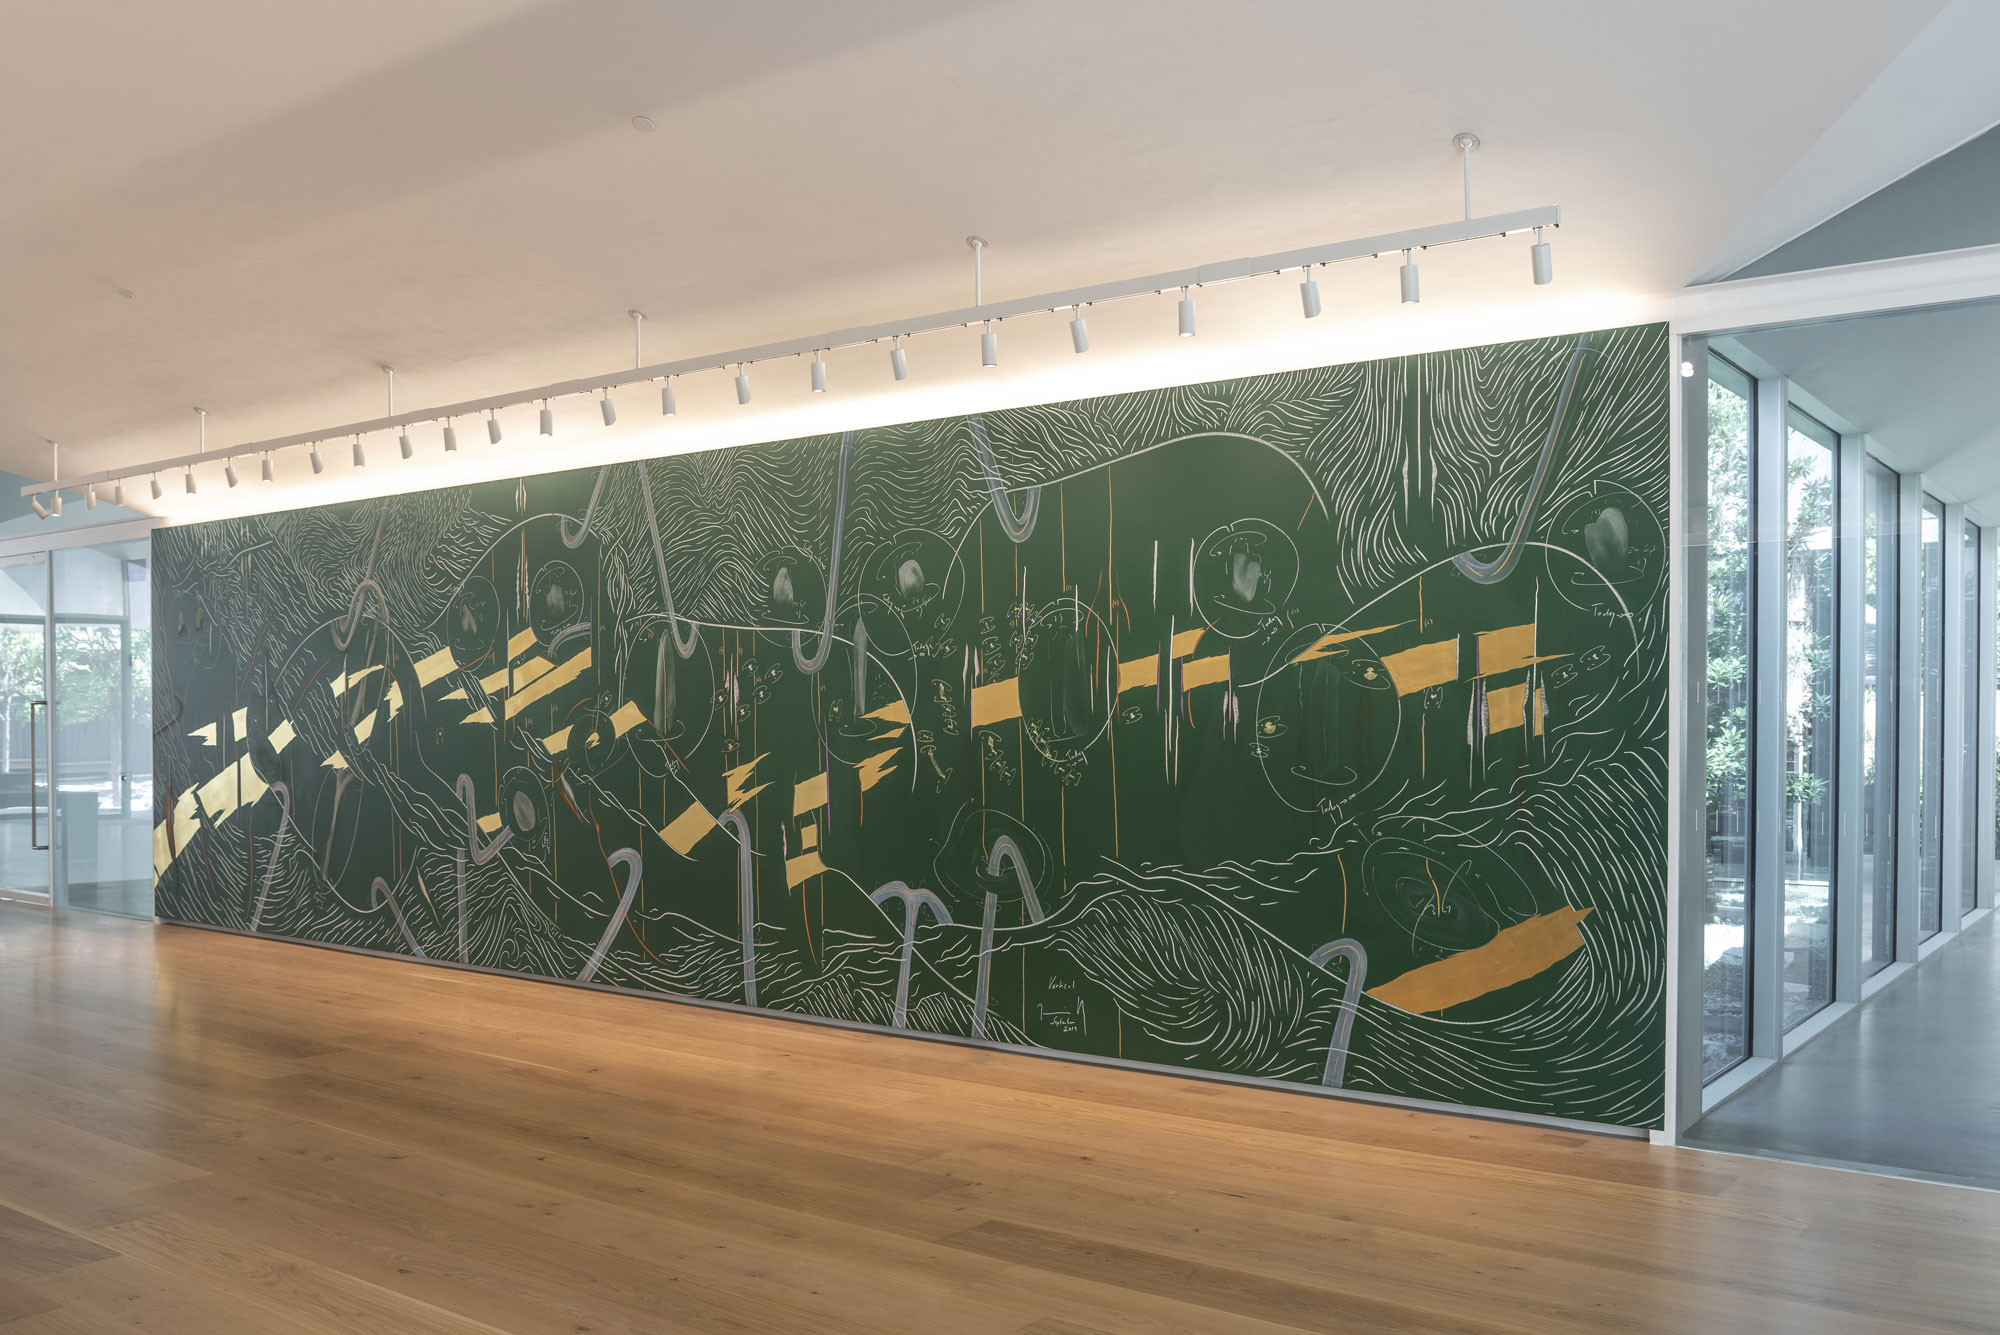 WV 2019-099 Vertical Jorinde Voigt Houston 2019 Two part mural, 289,56 x 1097,28 cm und 289,56 x 487,68 cm Chalks and gold leaf on wall paint unique work signed Temporary installation from 28.09.2019 until 30.09.2020 In the entrance area of the Menil Drawing Institute. The Menil Collection, Houston, USA